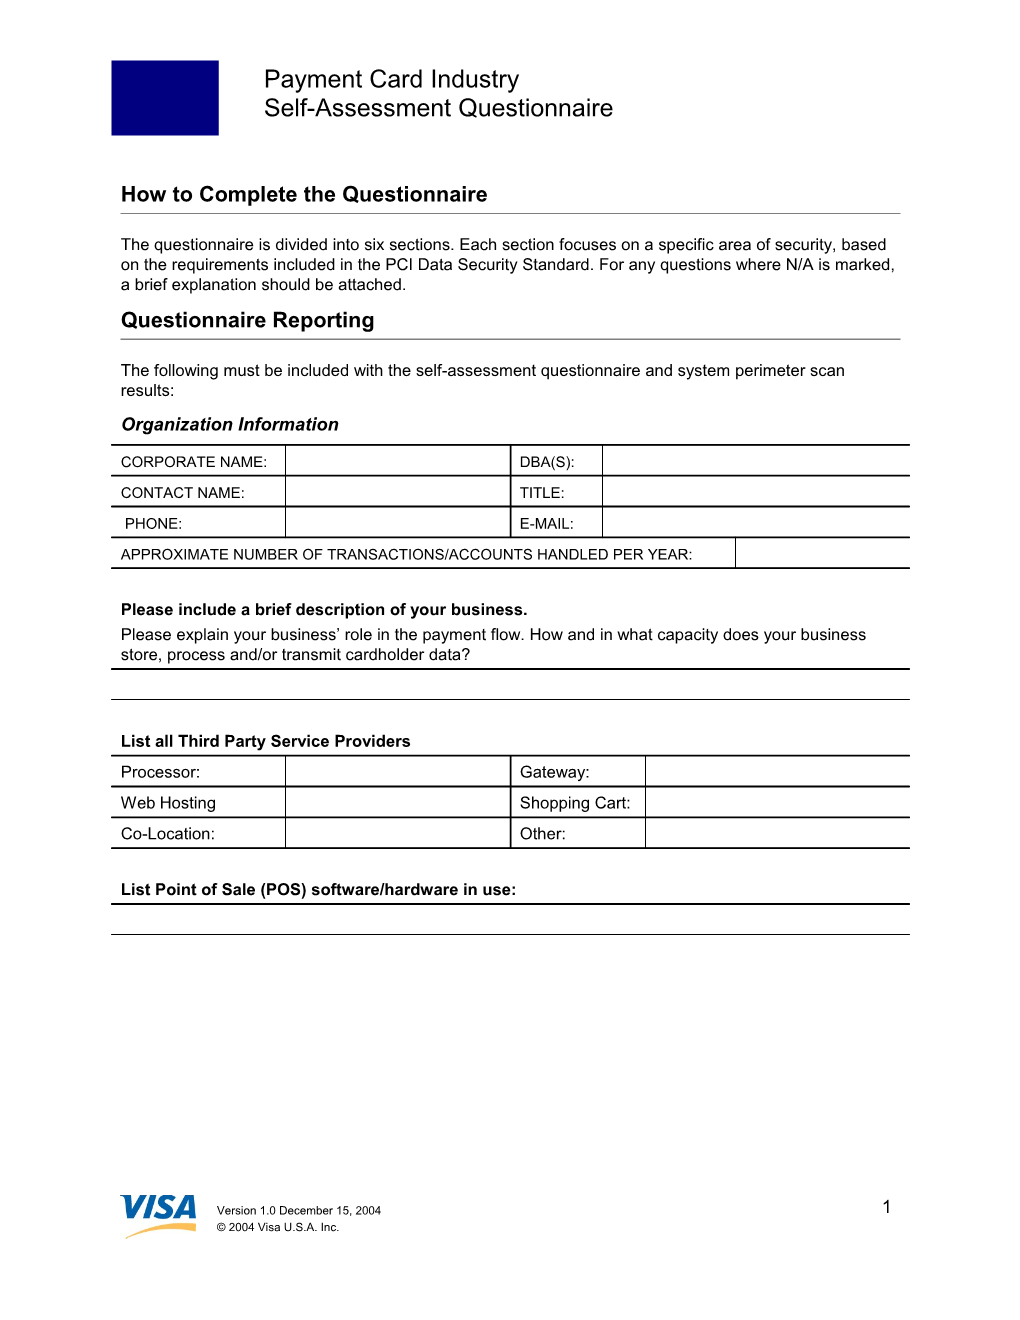 How to Complete the Questionnaire